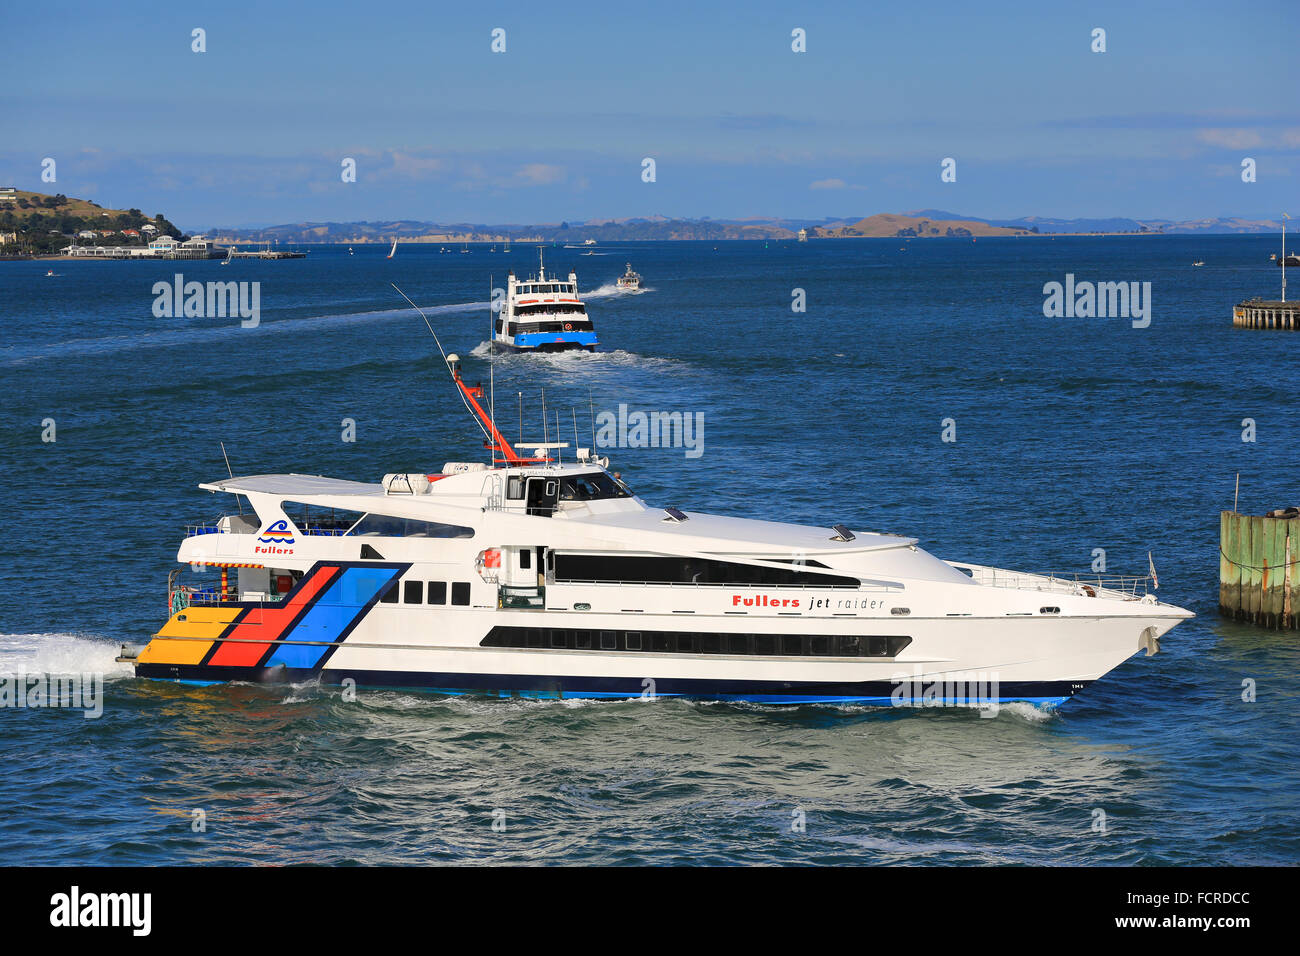 Fullers Jet Raider ferry approaching the ferry dock at Auckland, New Zealand. Stock Photo